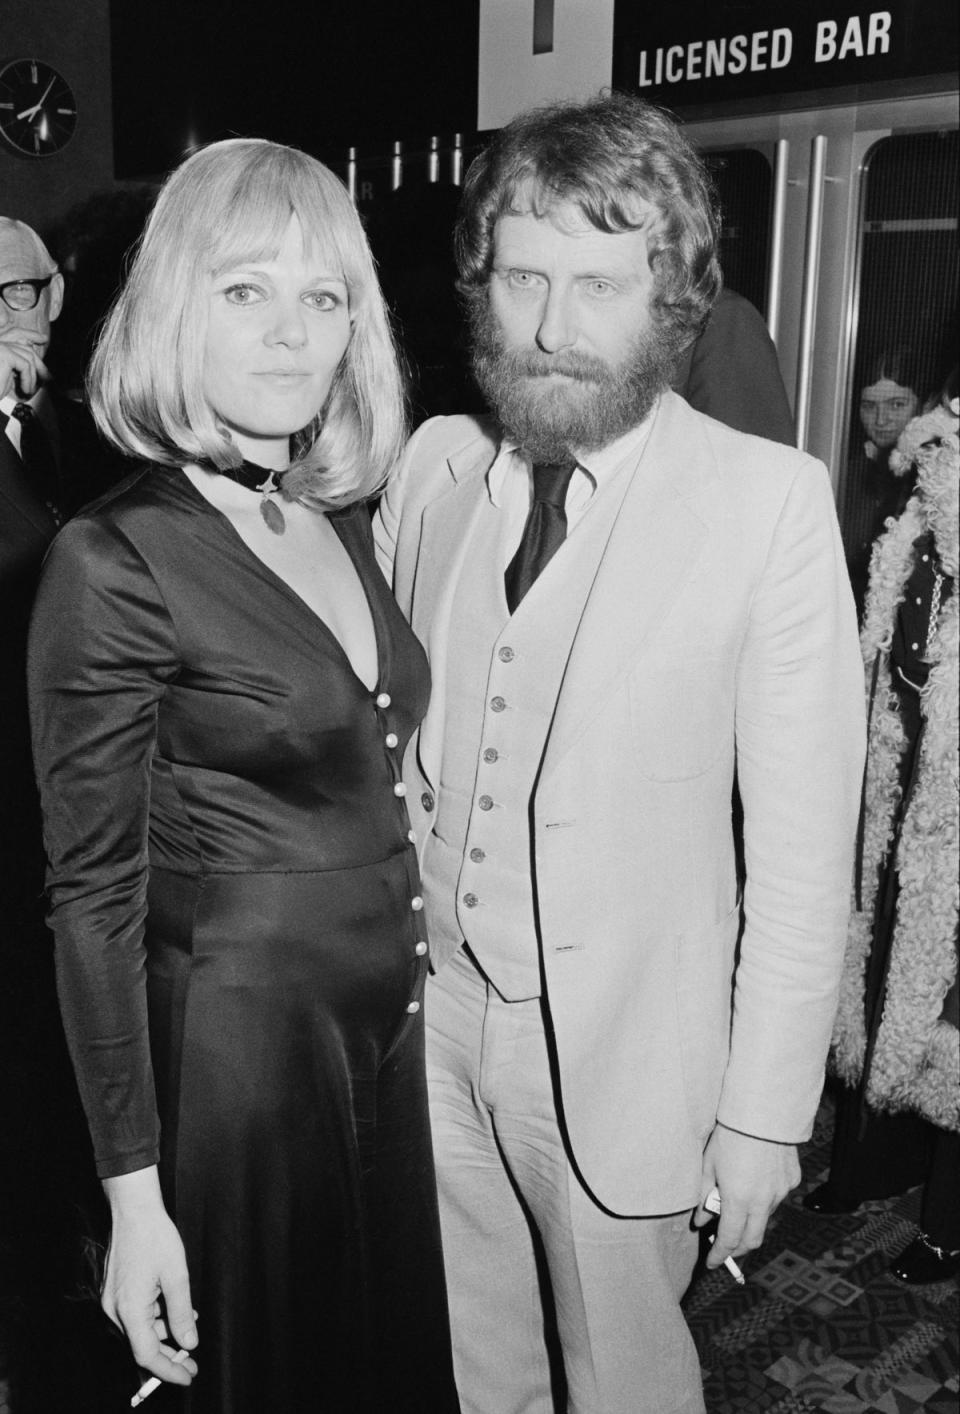 Hodges with a friend at a screening of ‘Get Carter’ in 1971 (Getty Images)